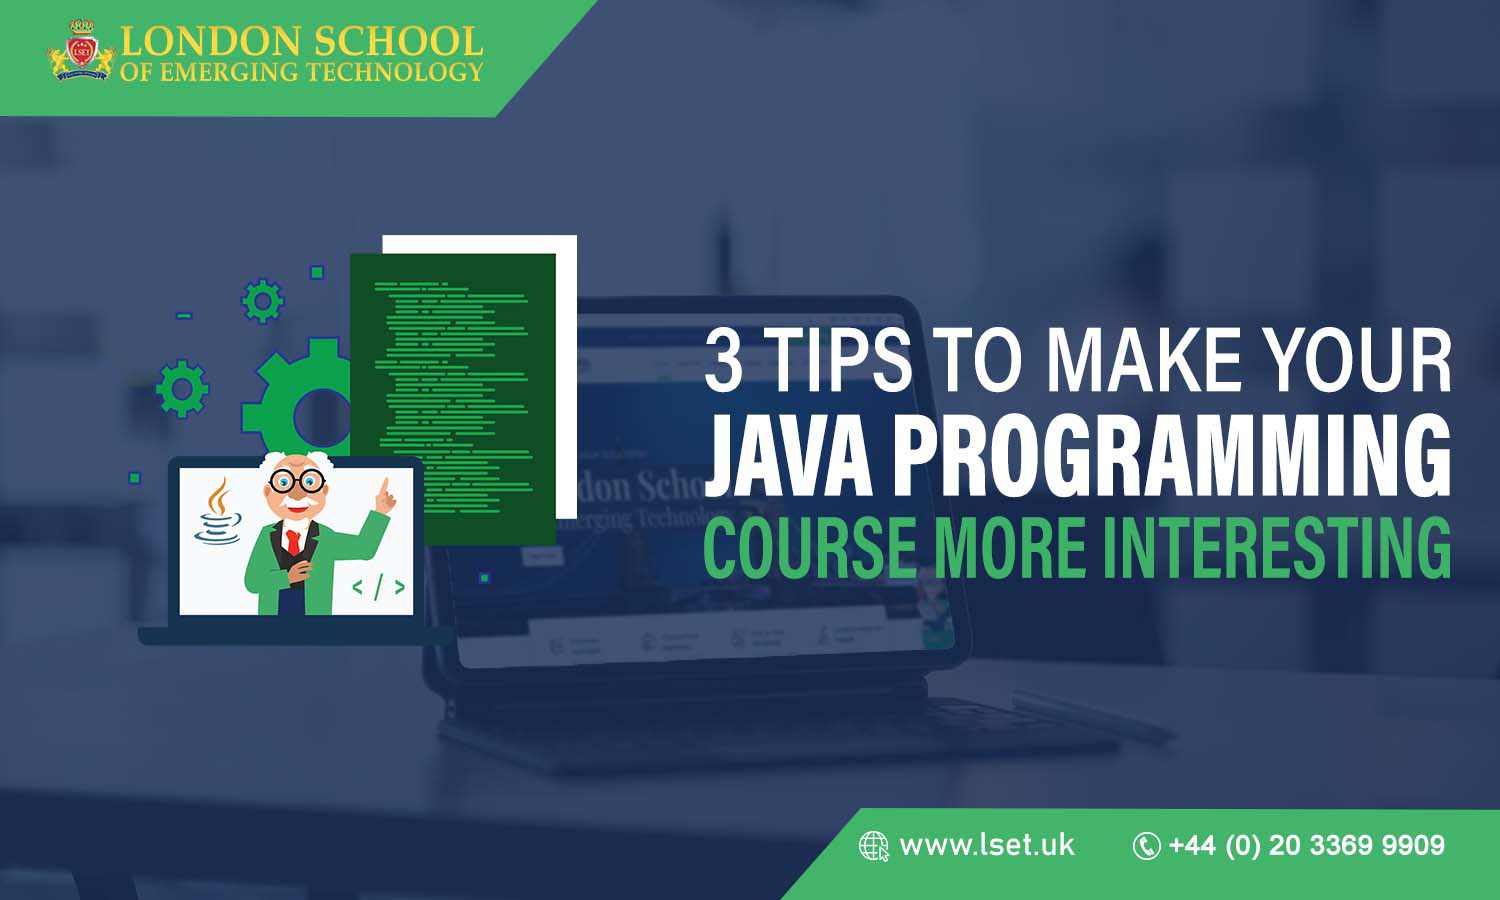 3 Tips to Make Your Java Programming Course More Interesting